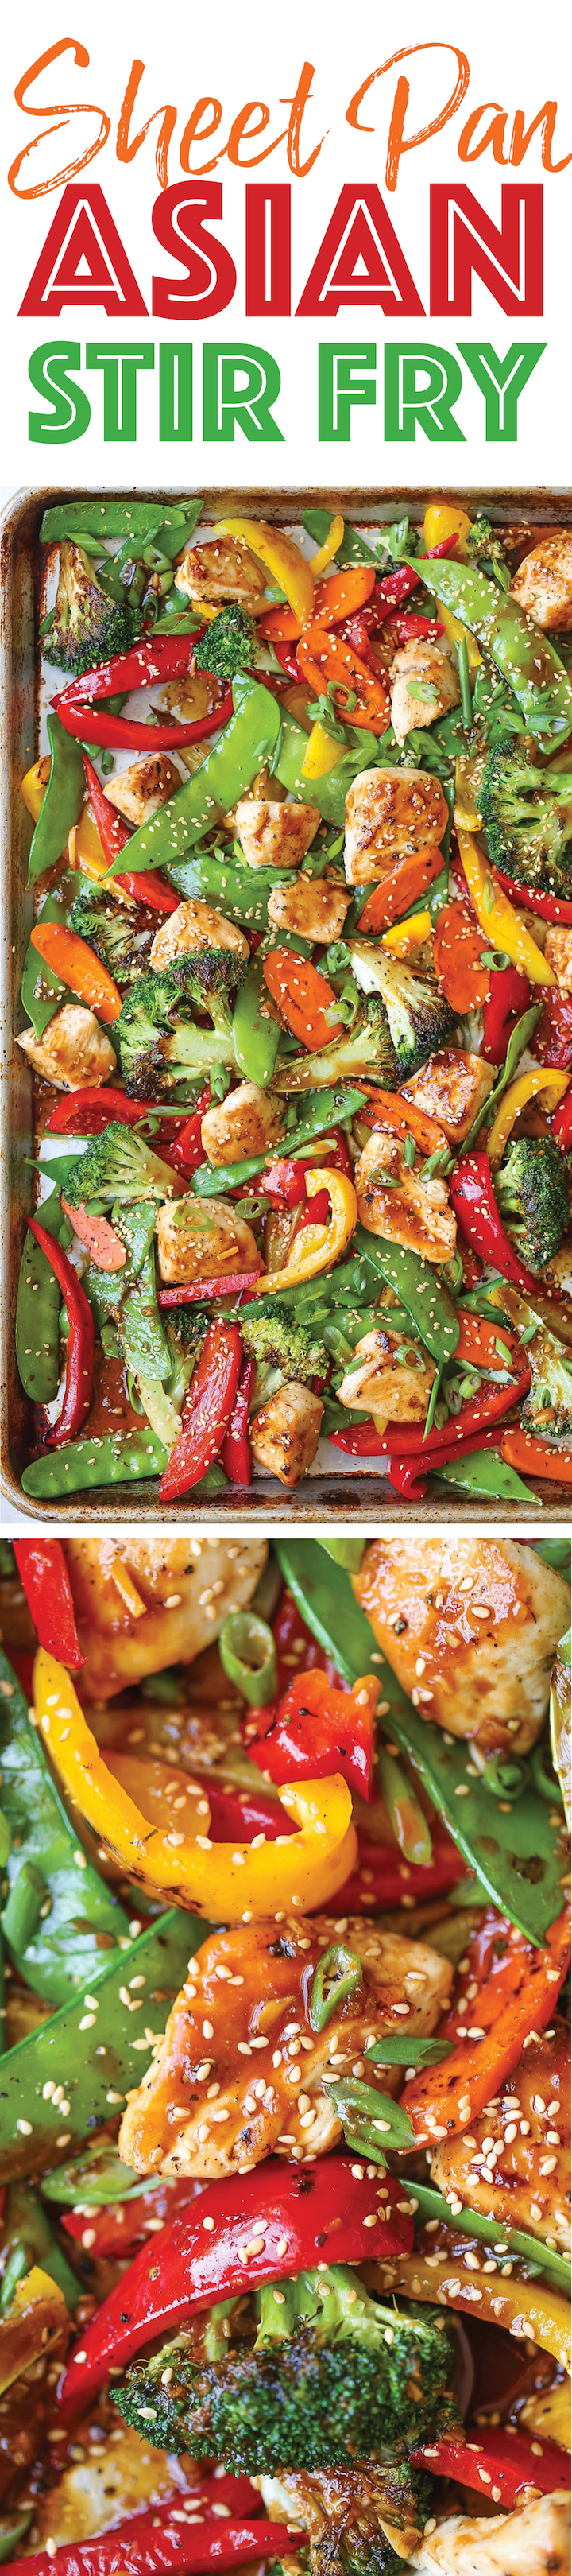 Sheet Pan Asian Stir Fry - Everyone's favorite classic stir fry made on a sheet pan! No fancy wok/skillet needed here. Only one pan for clean-up. YESSSSS!